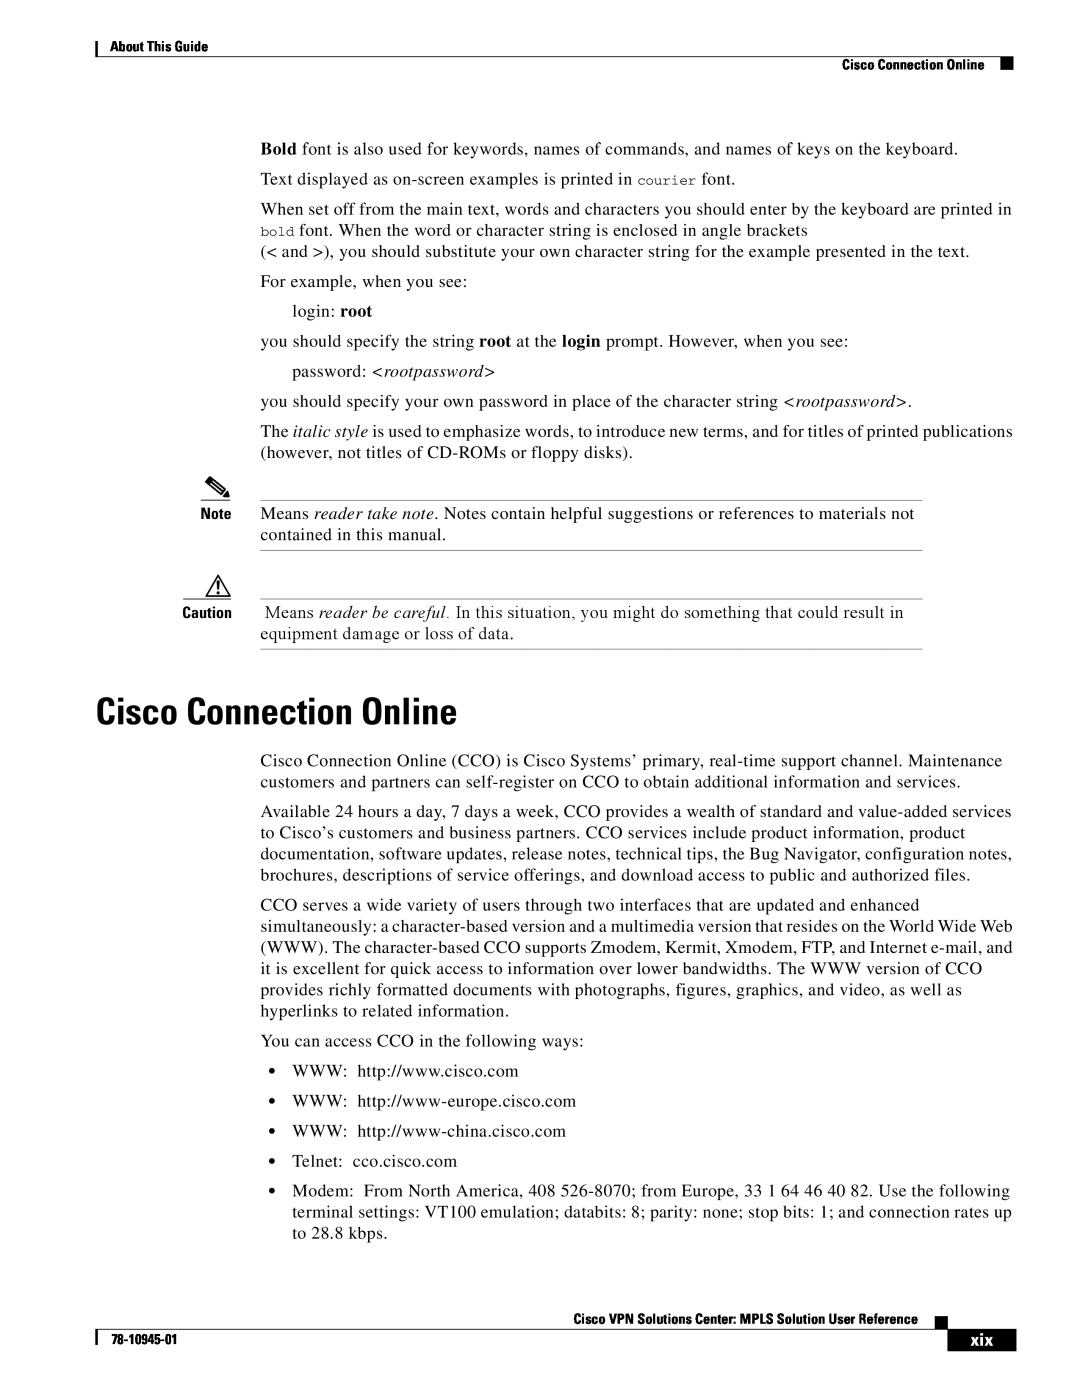 Cisco Systems 78-10945-01 manual Cisco Connection Online, password rootpassword 